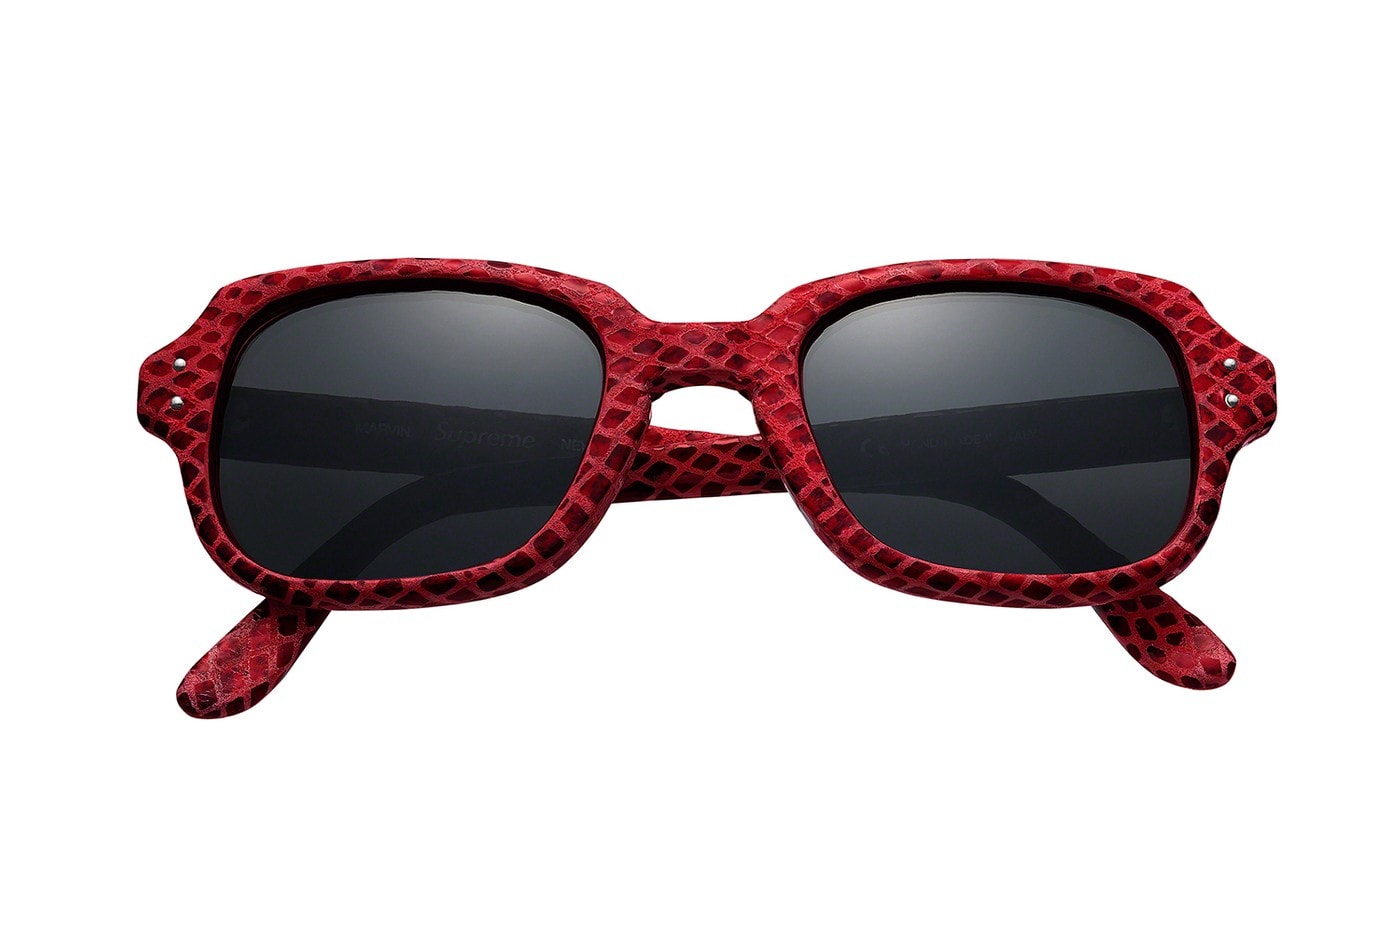 Supreme Sunglasses Collection Summer Release Eyewear Accessories Collection Drop Frames